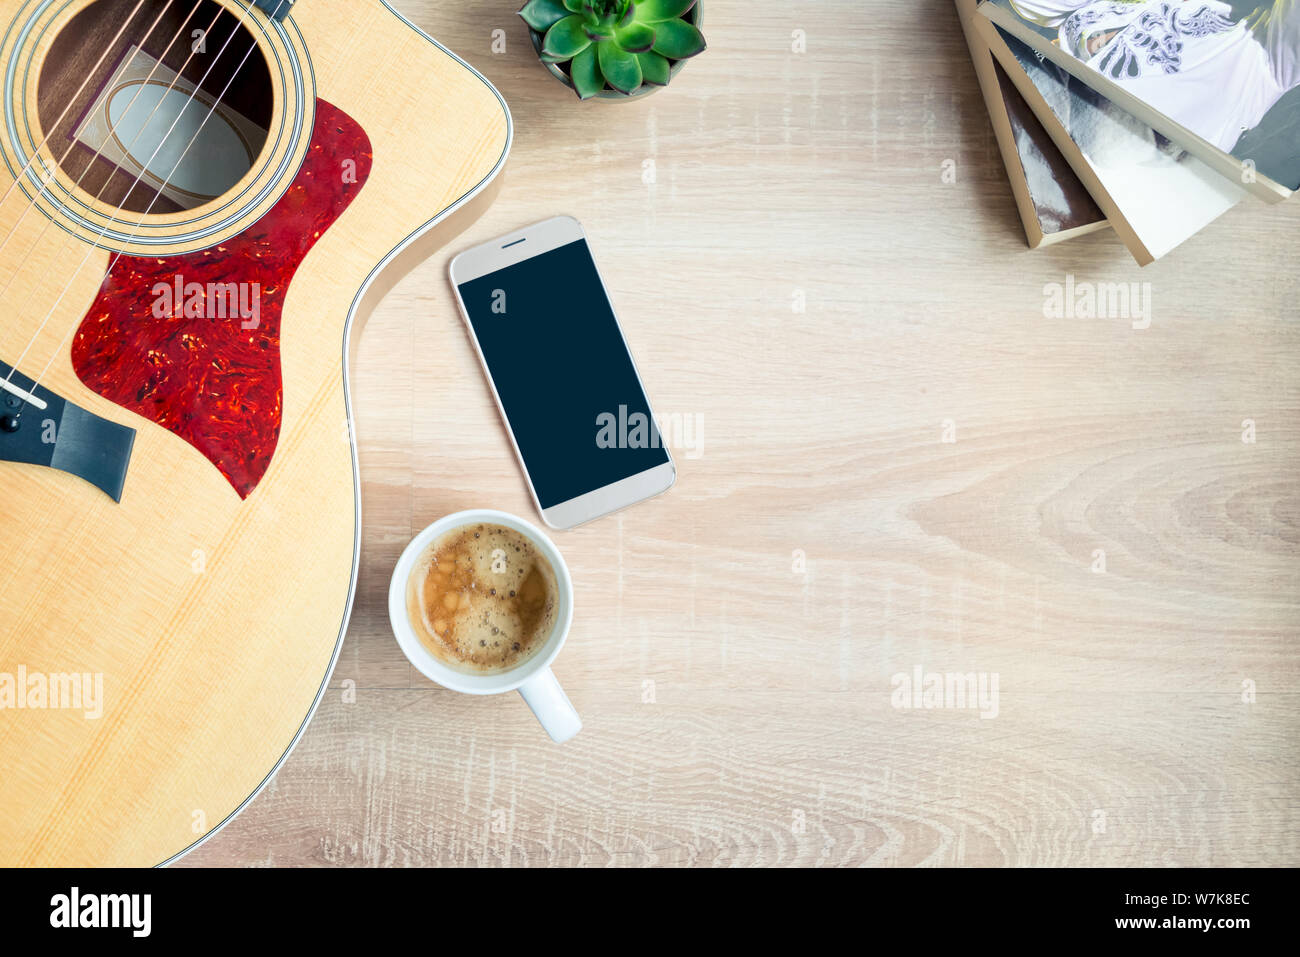 Top view of cosy home scene. Guitar, books, cup of coffee, phone and succulent plants over wooden background. Copy space, mock-up. Stock Photo